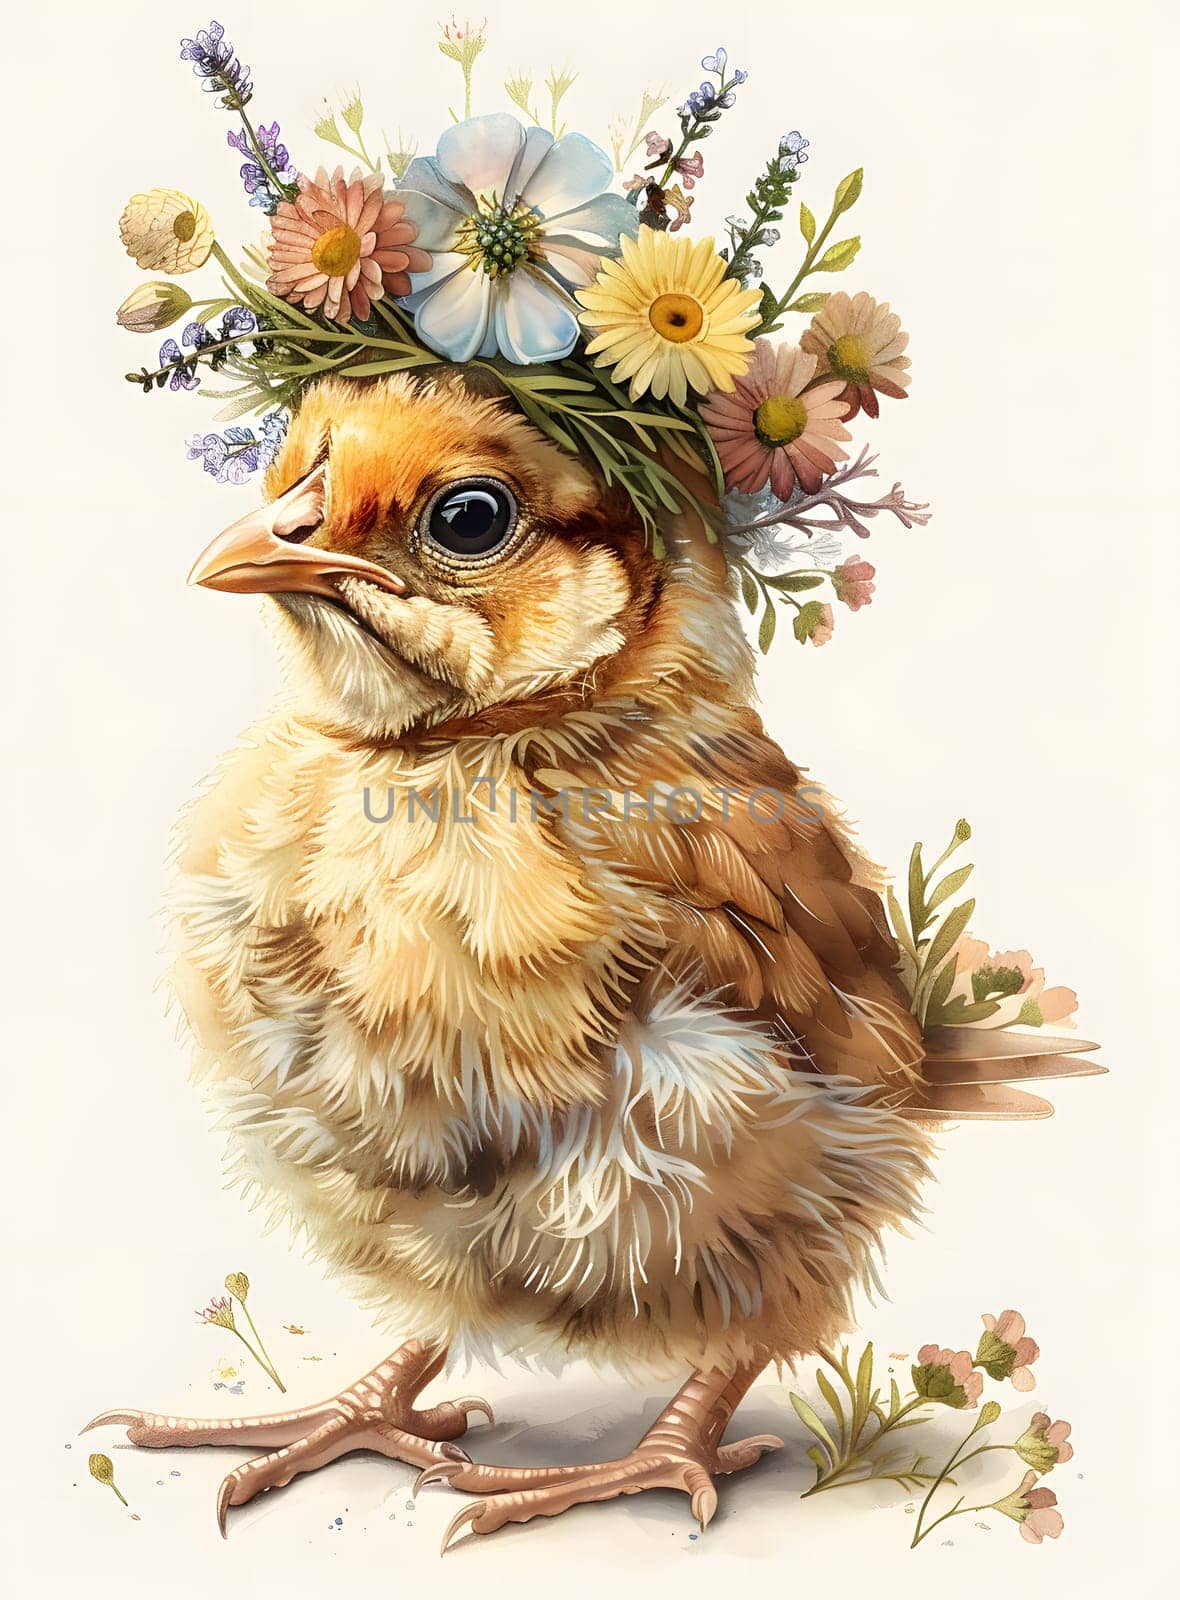 A Finch chick adorned with a flower crown perching on a branch by Nadtochiy